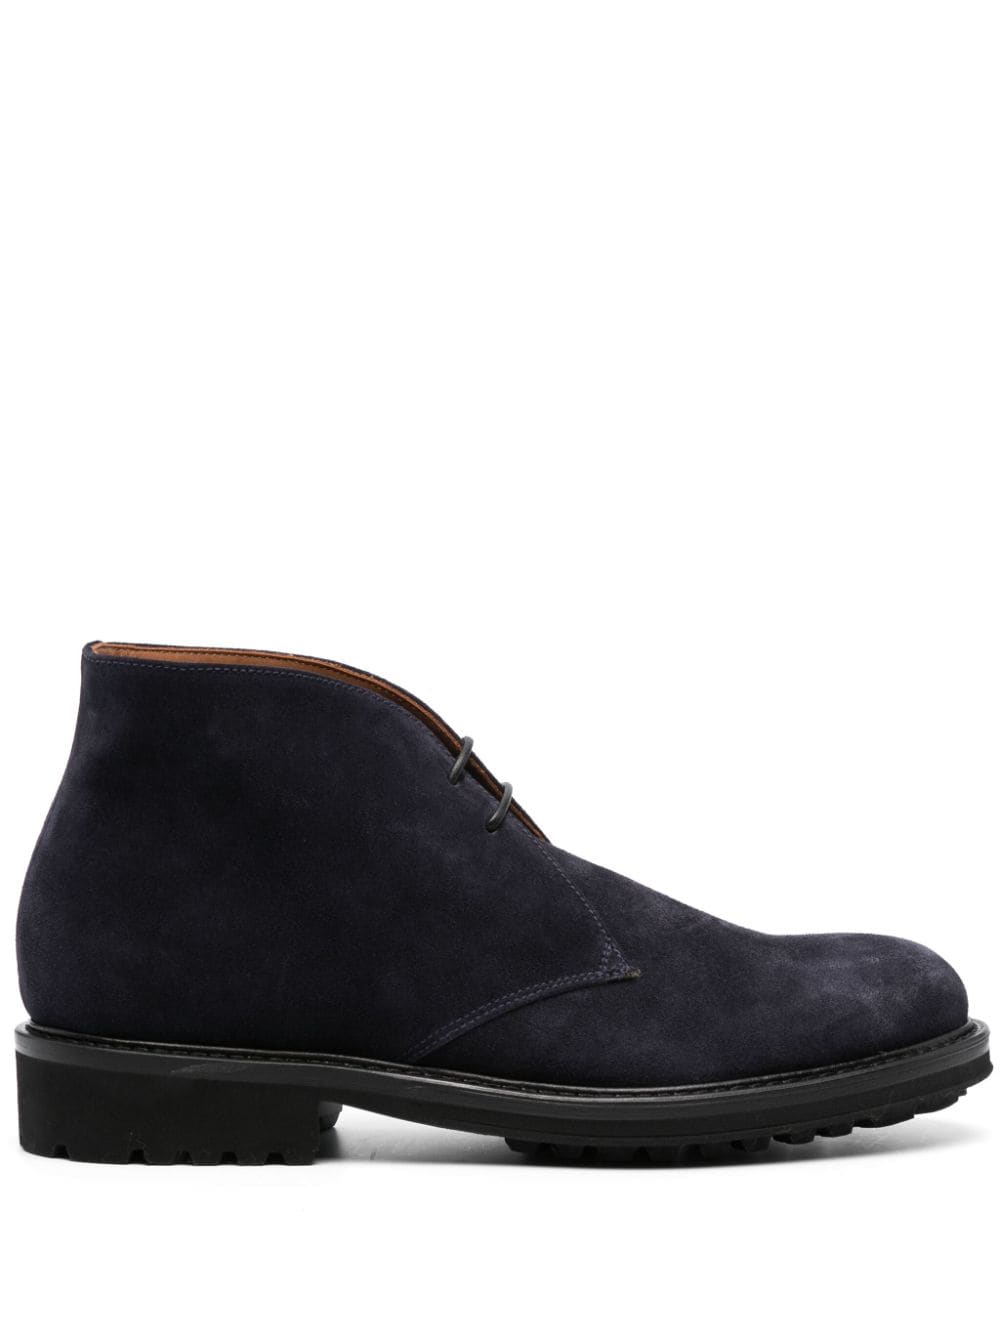 DOUCAL'S LACE-UP SUEDE BOOTS